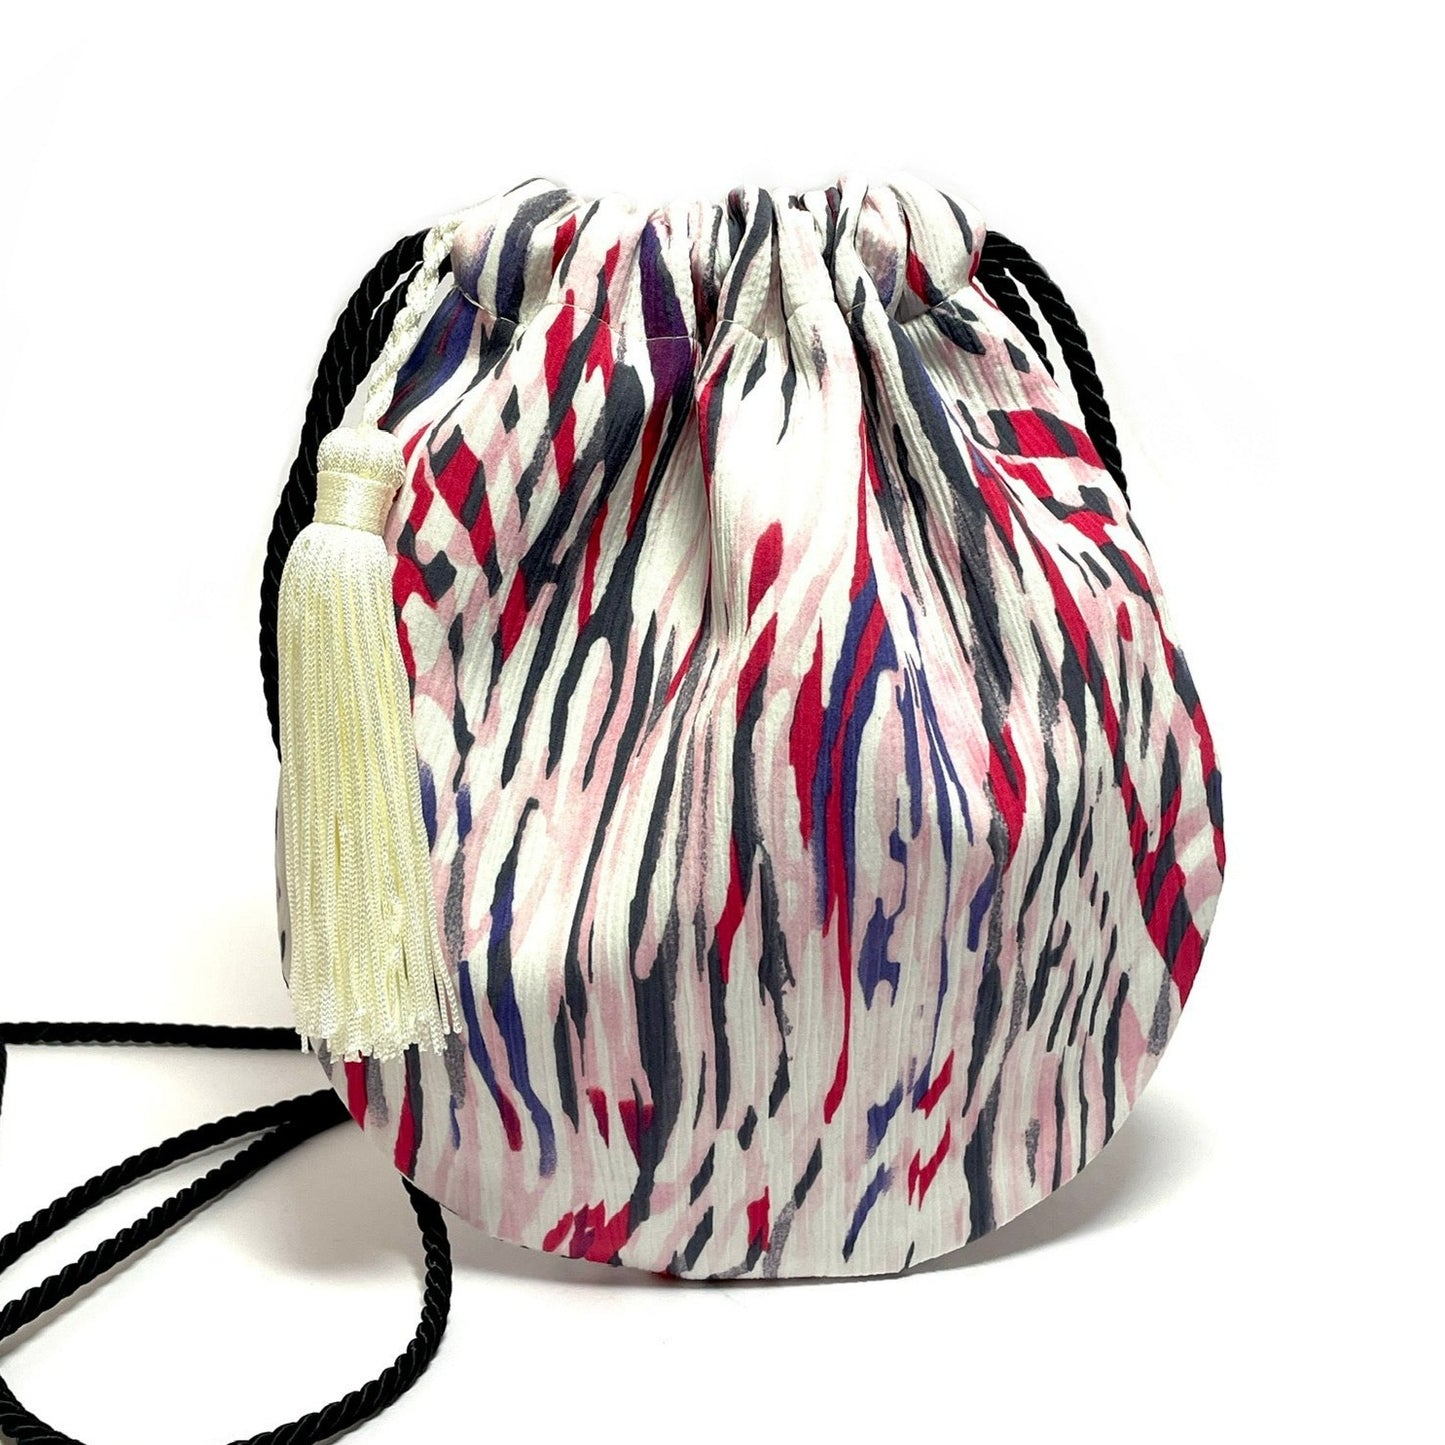 Colorful bucket bag with a tassel